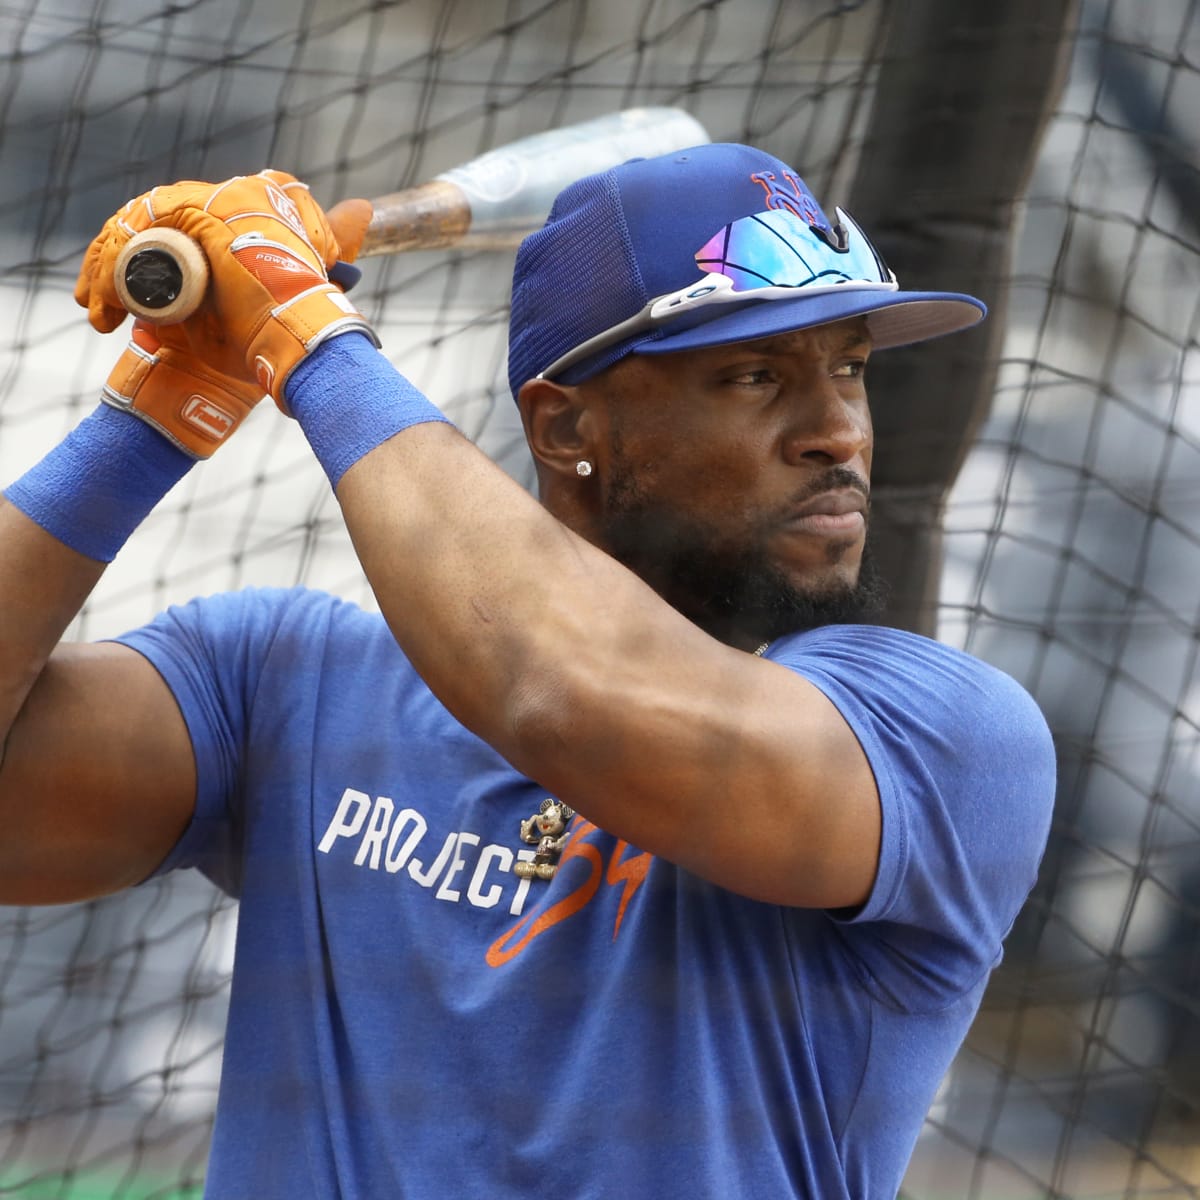 Scouts weigh in on Baby Mets, who could become 'X-factors' in the lineup